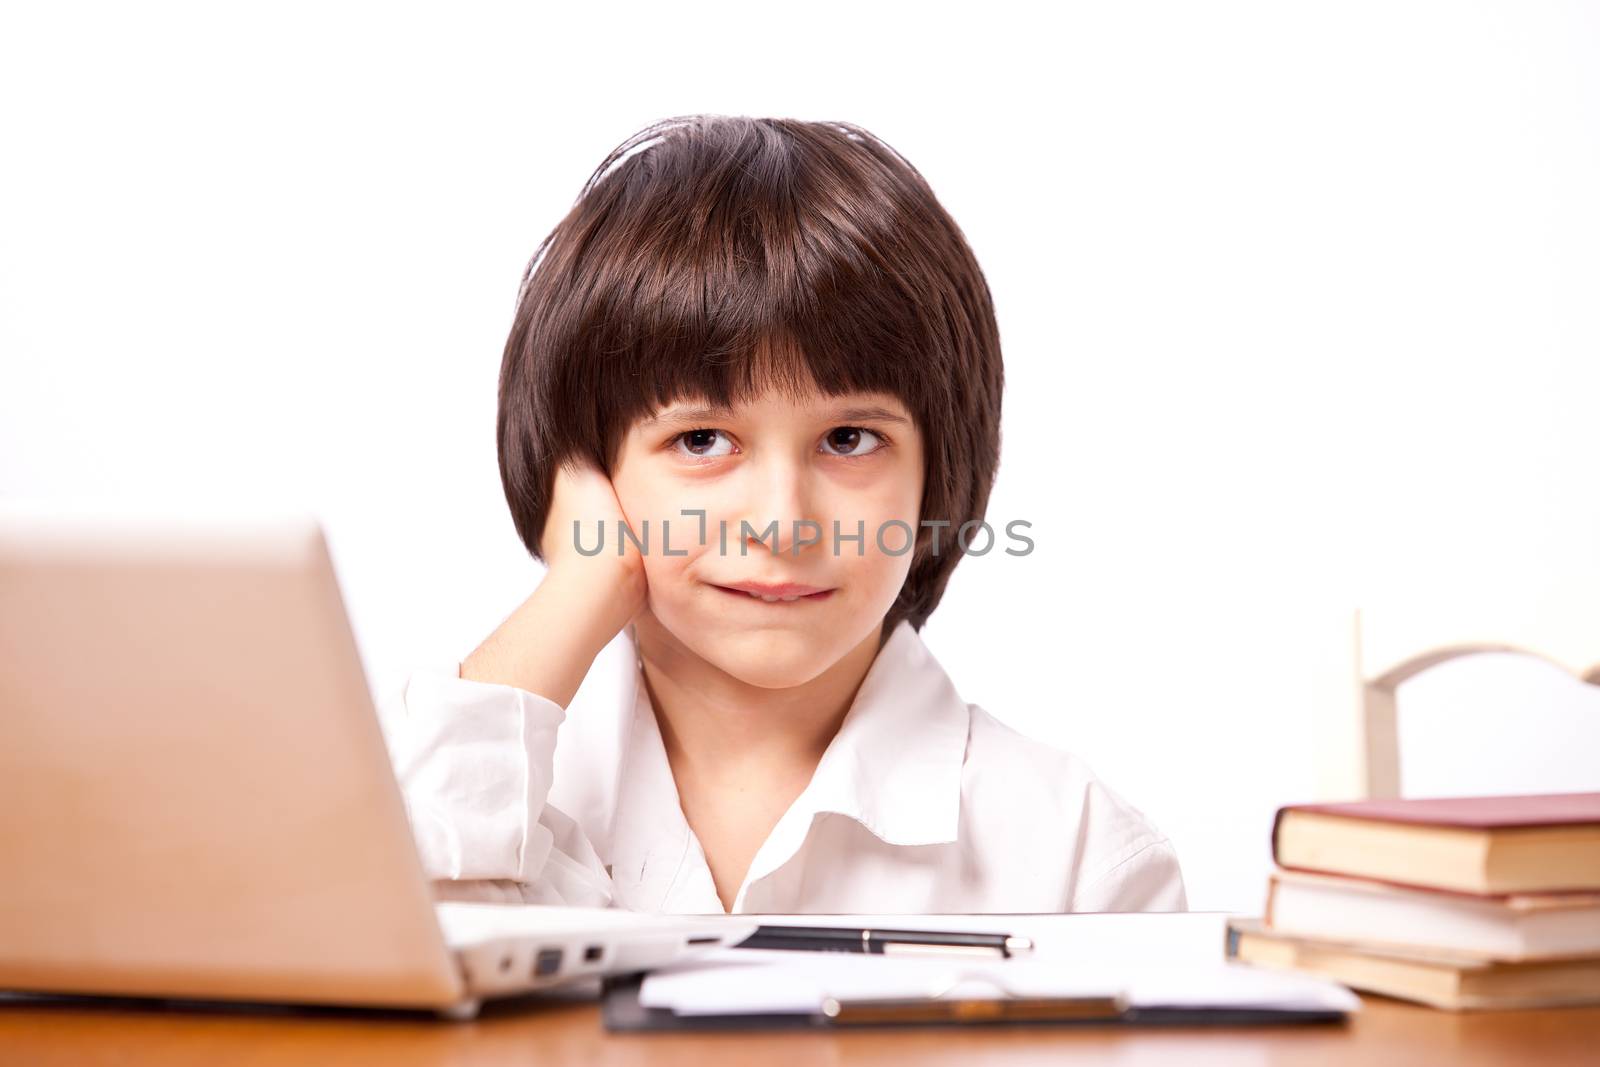 Sly boy at table with computer and books